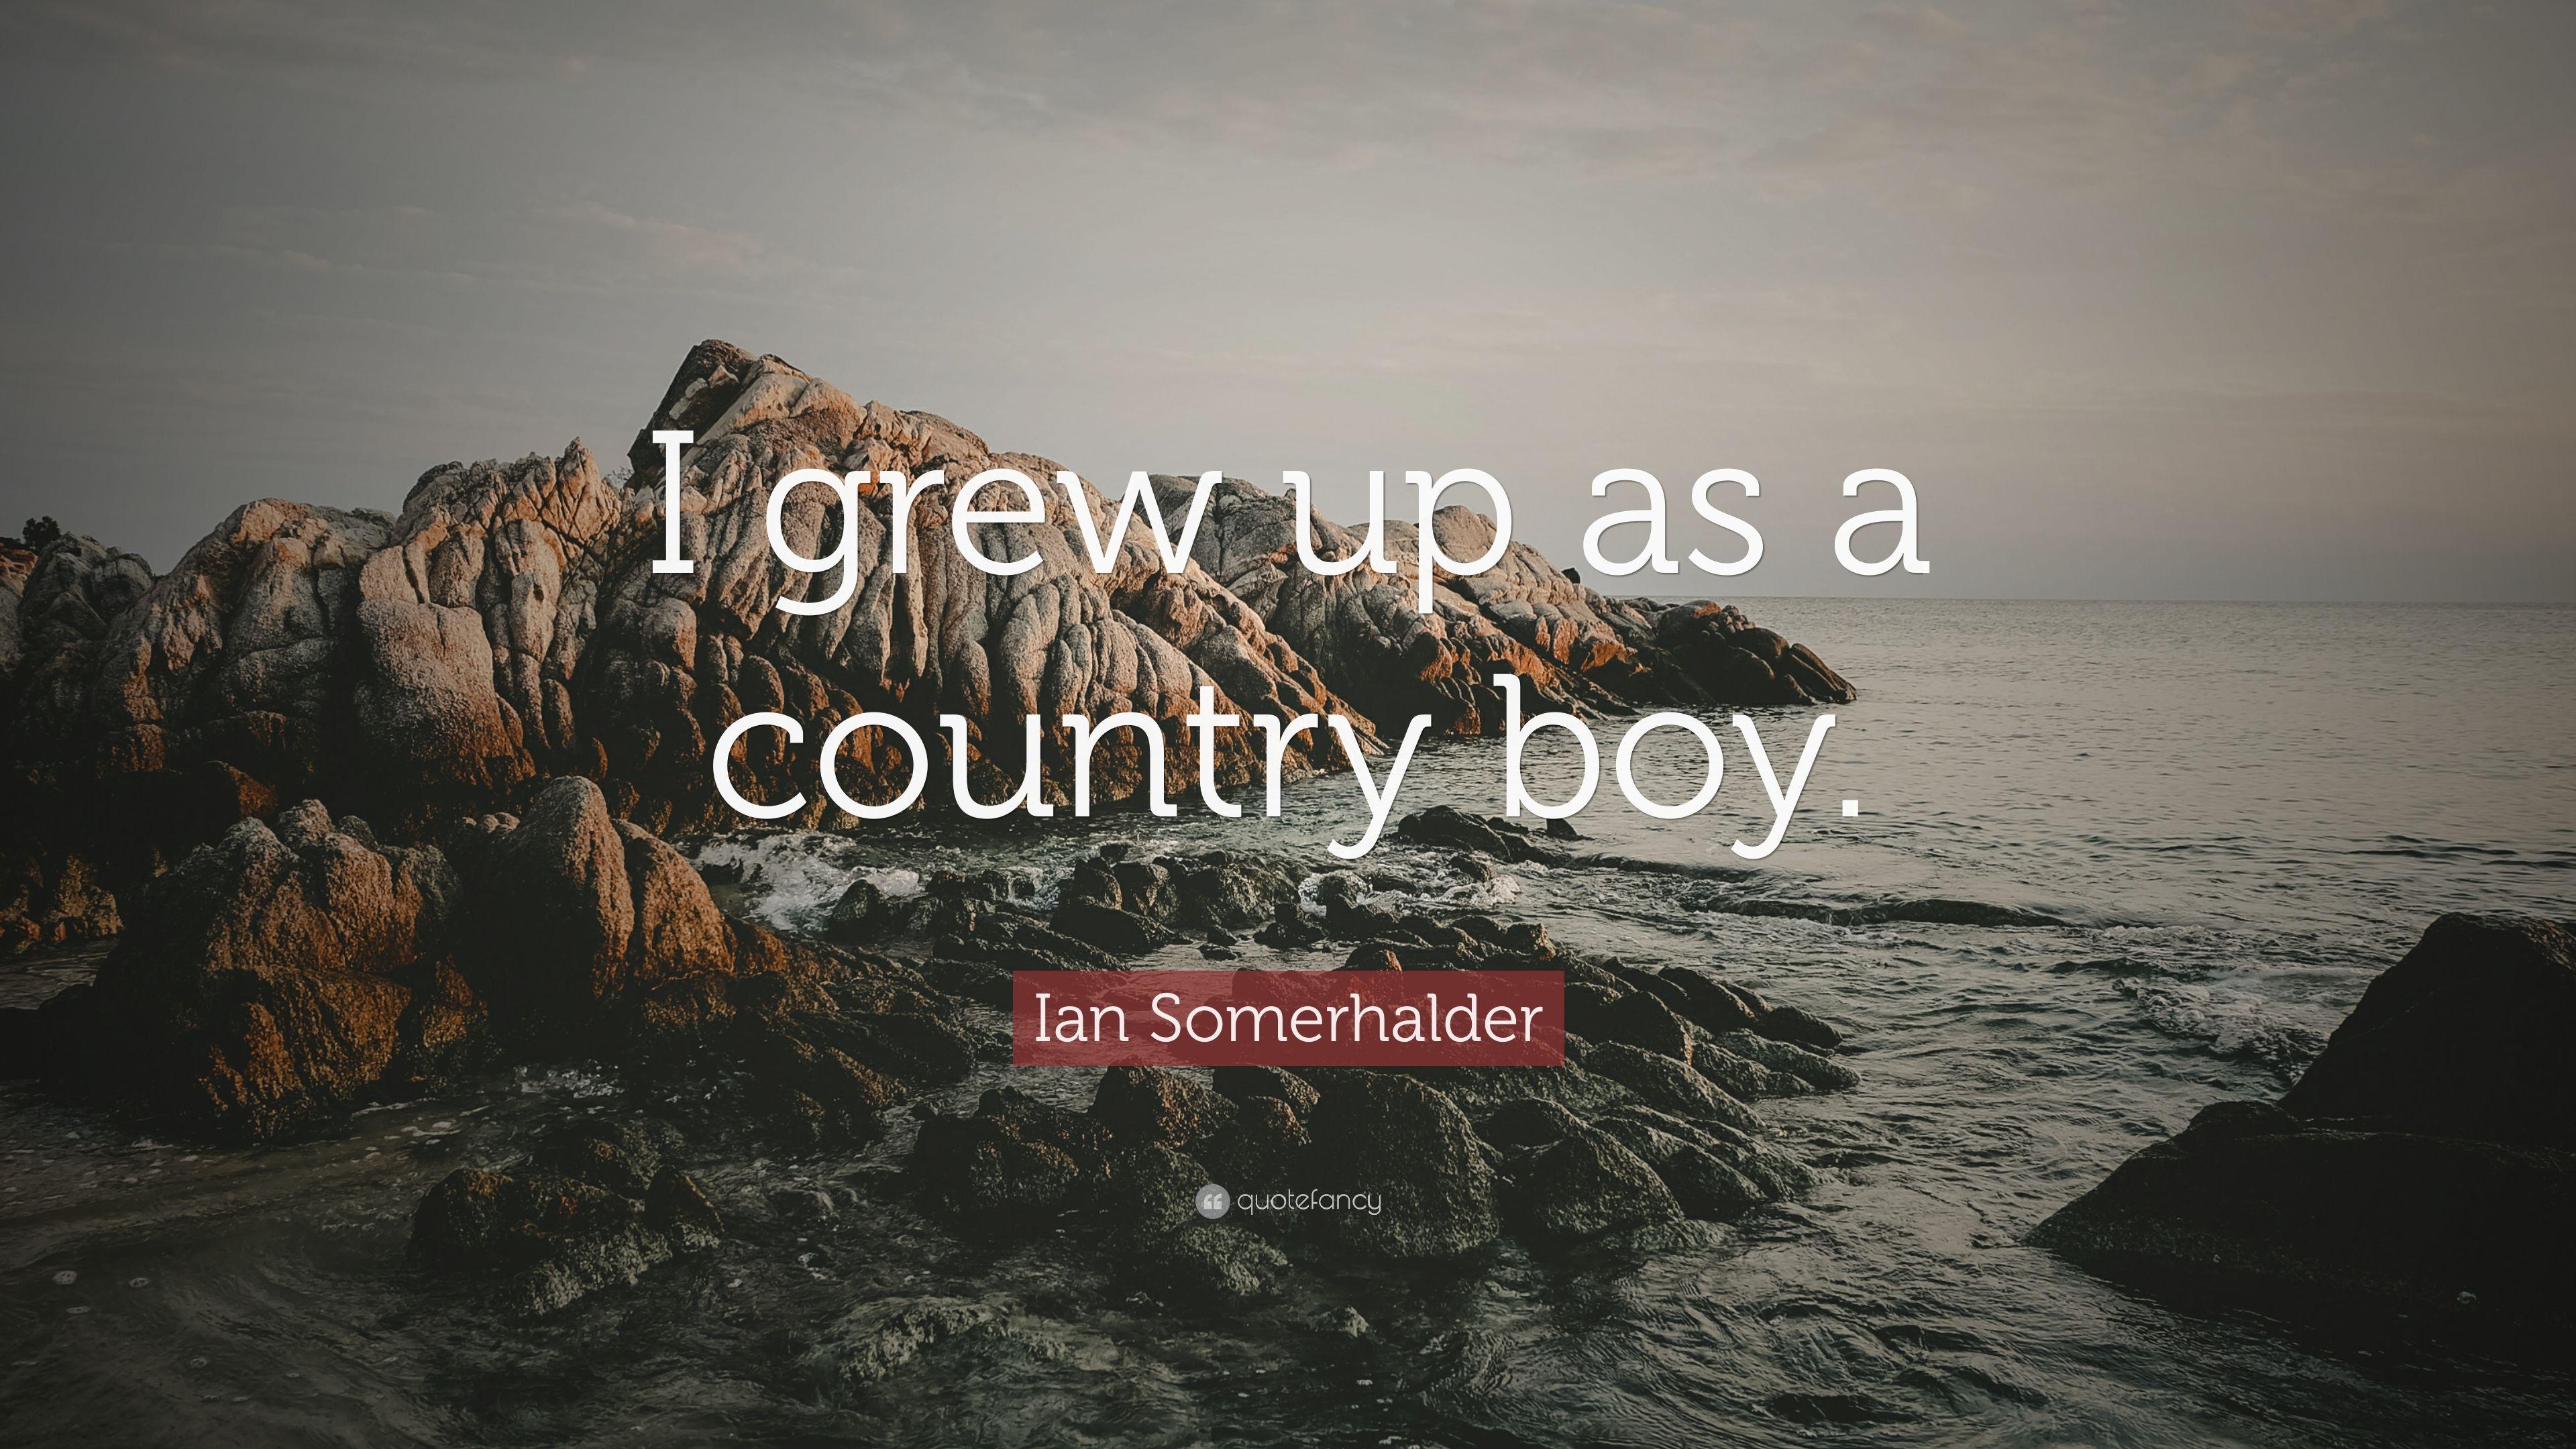 Ian Somerhalder Quote: “I grew up as a country boy.” 7 wallpaper